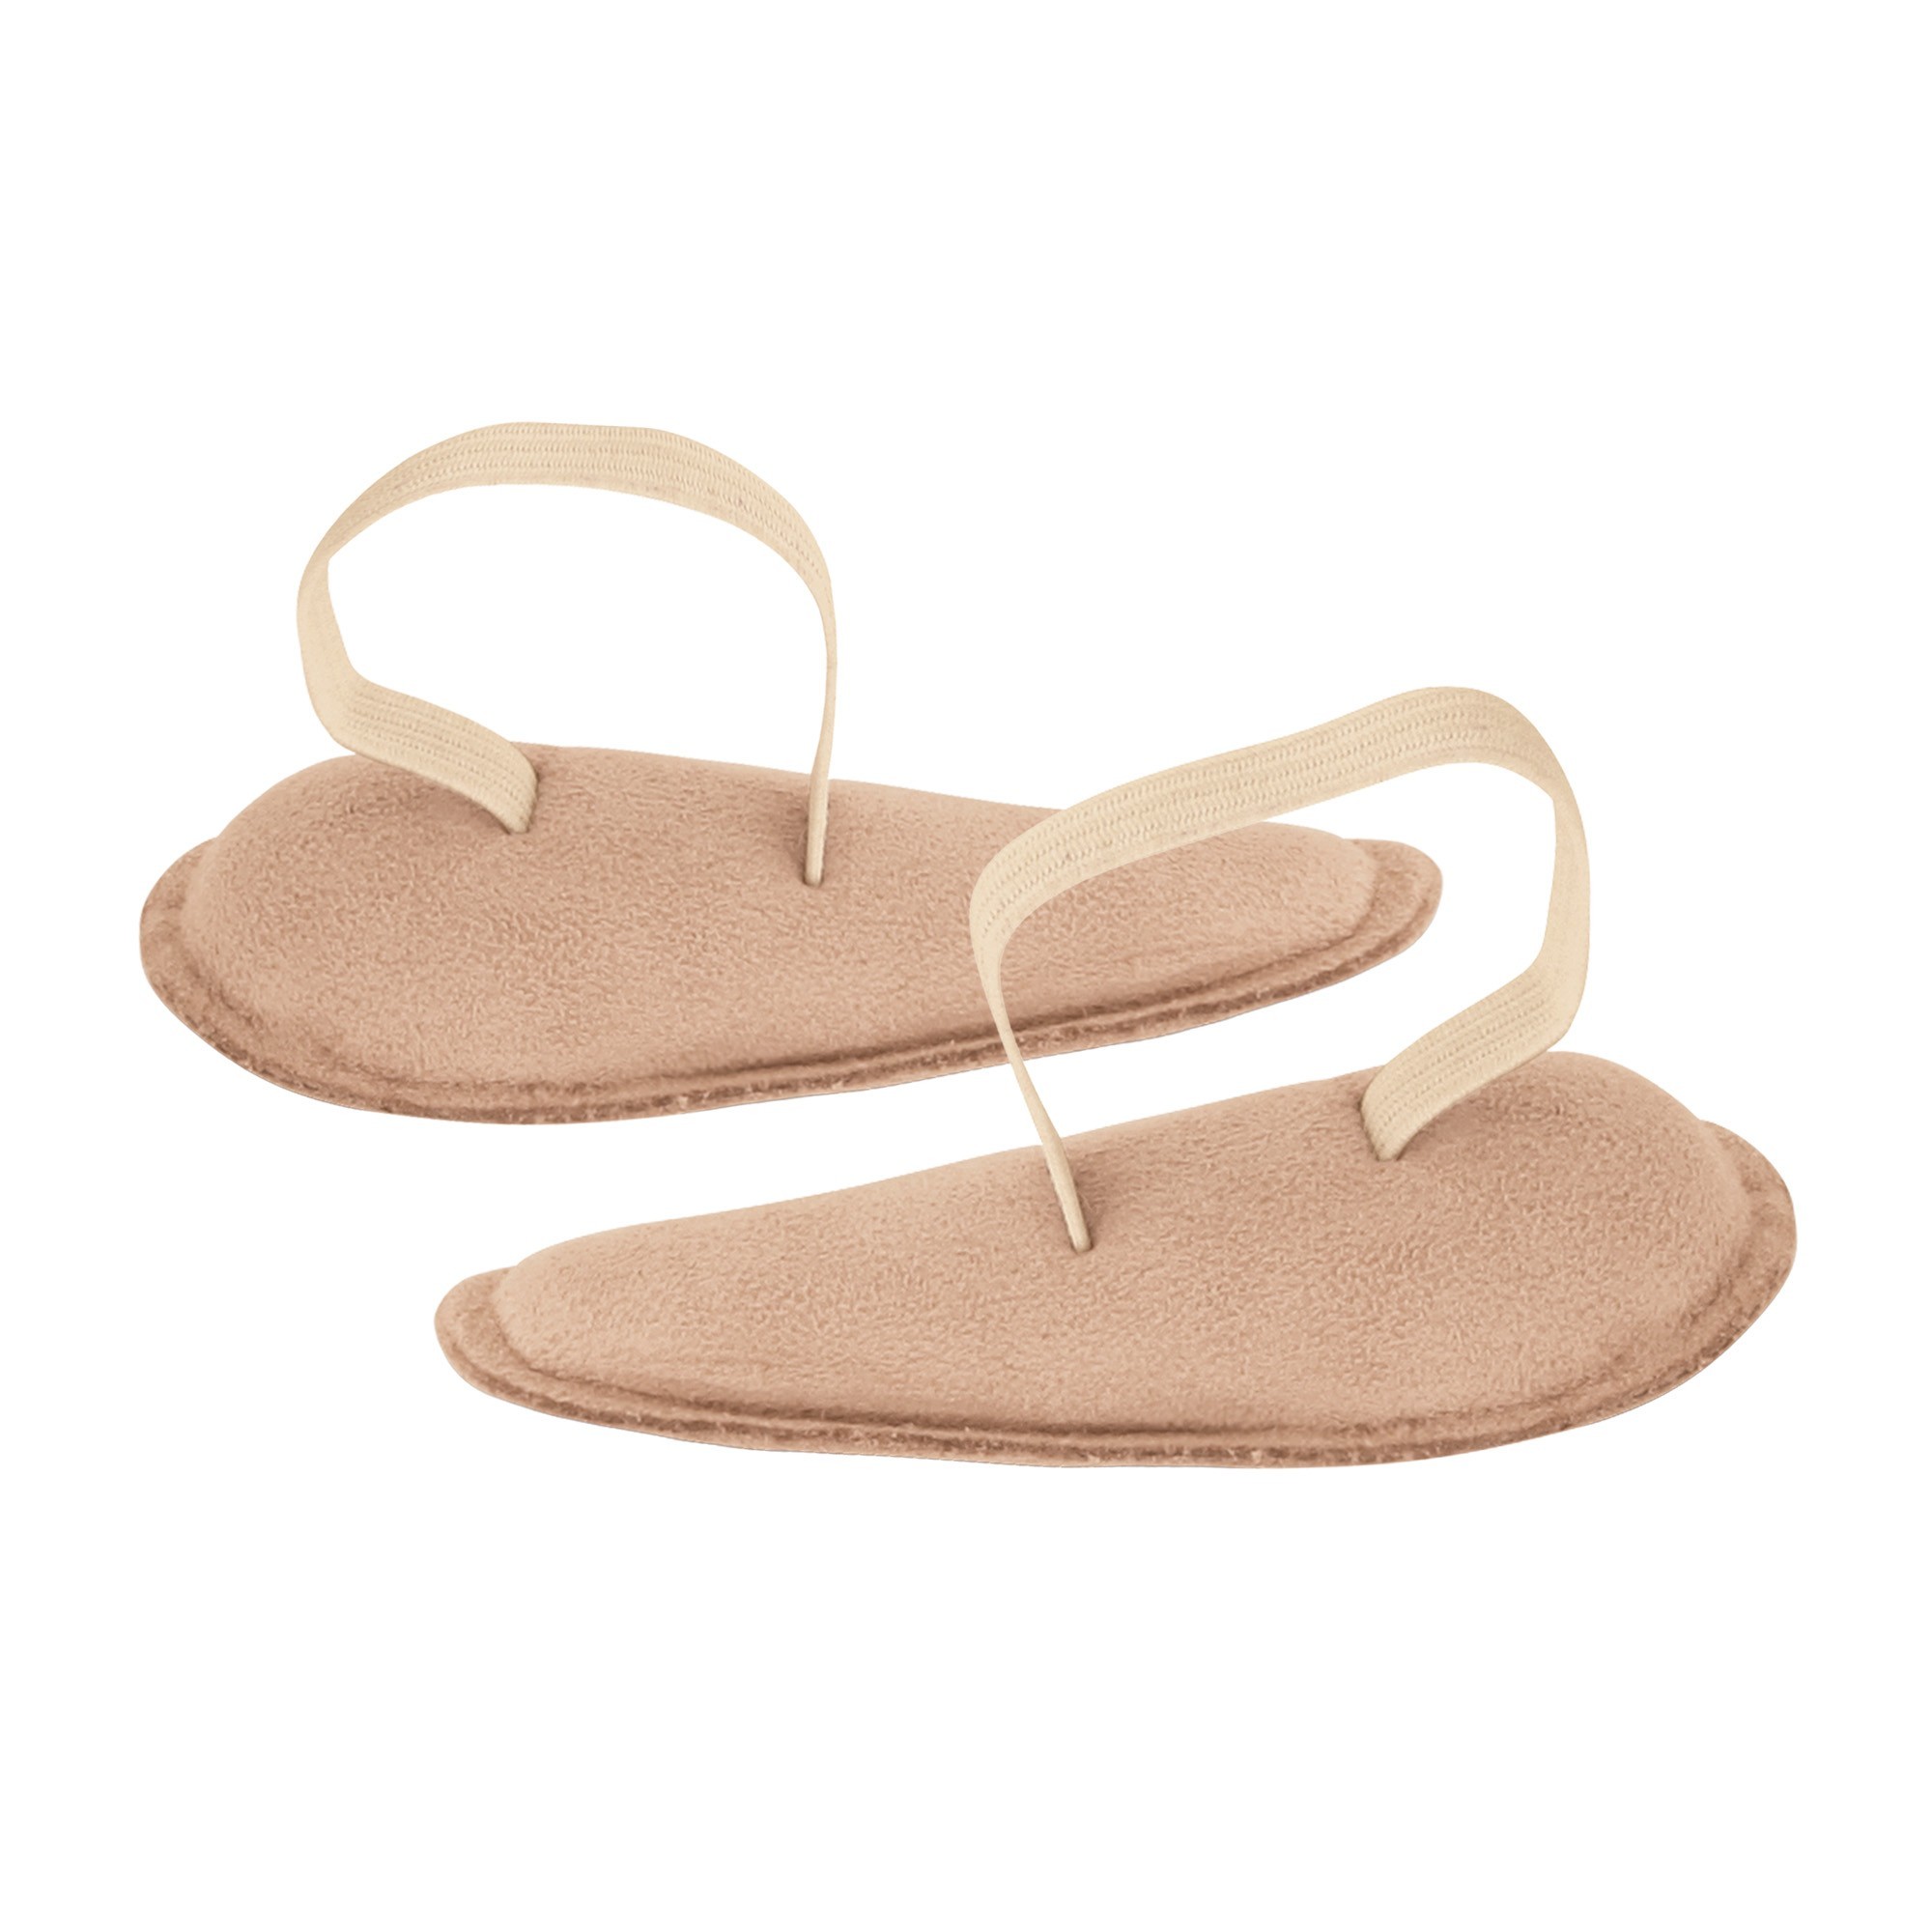 Suede covered toe cushion 1 pair